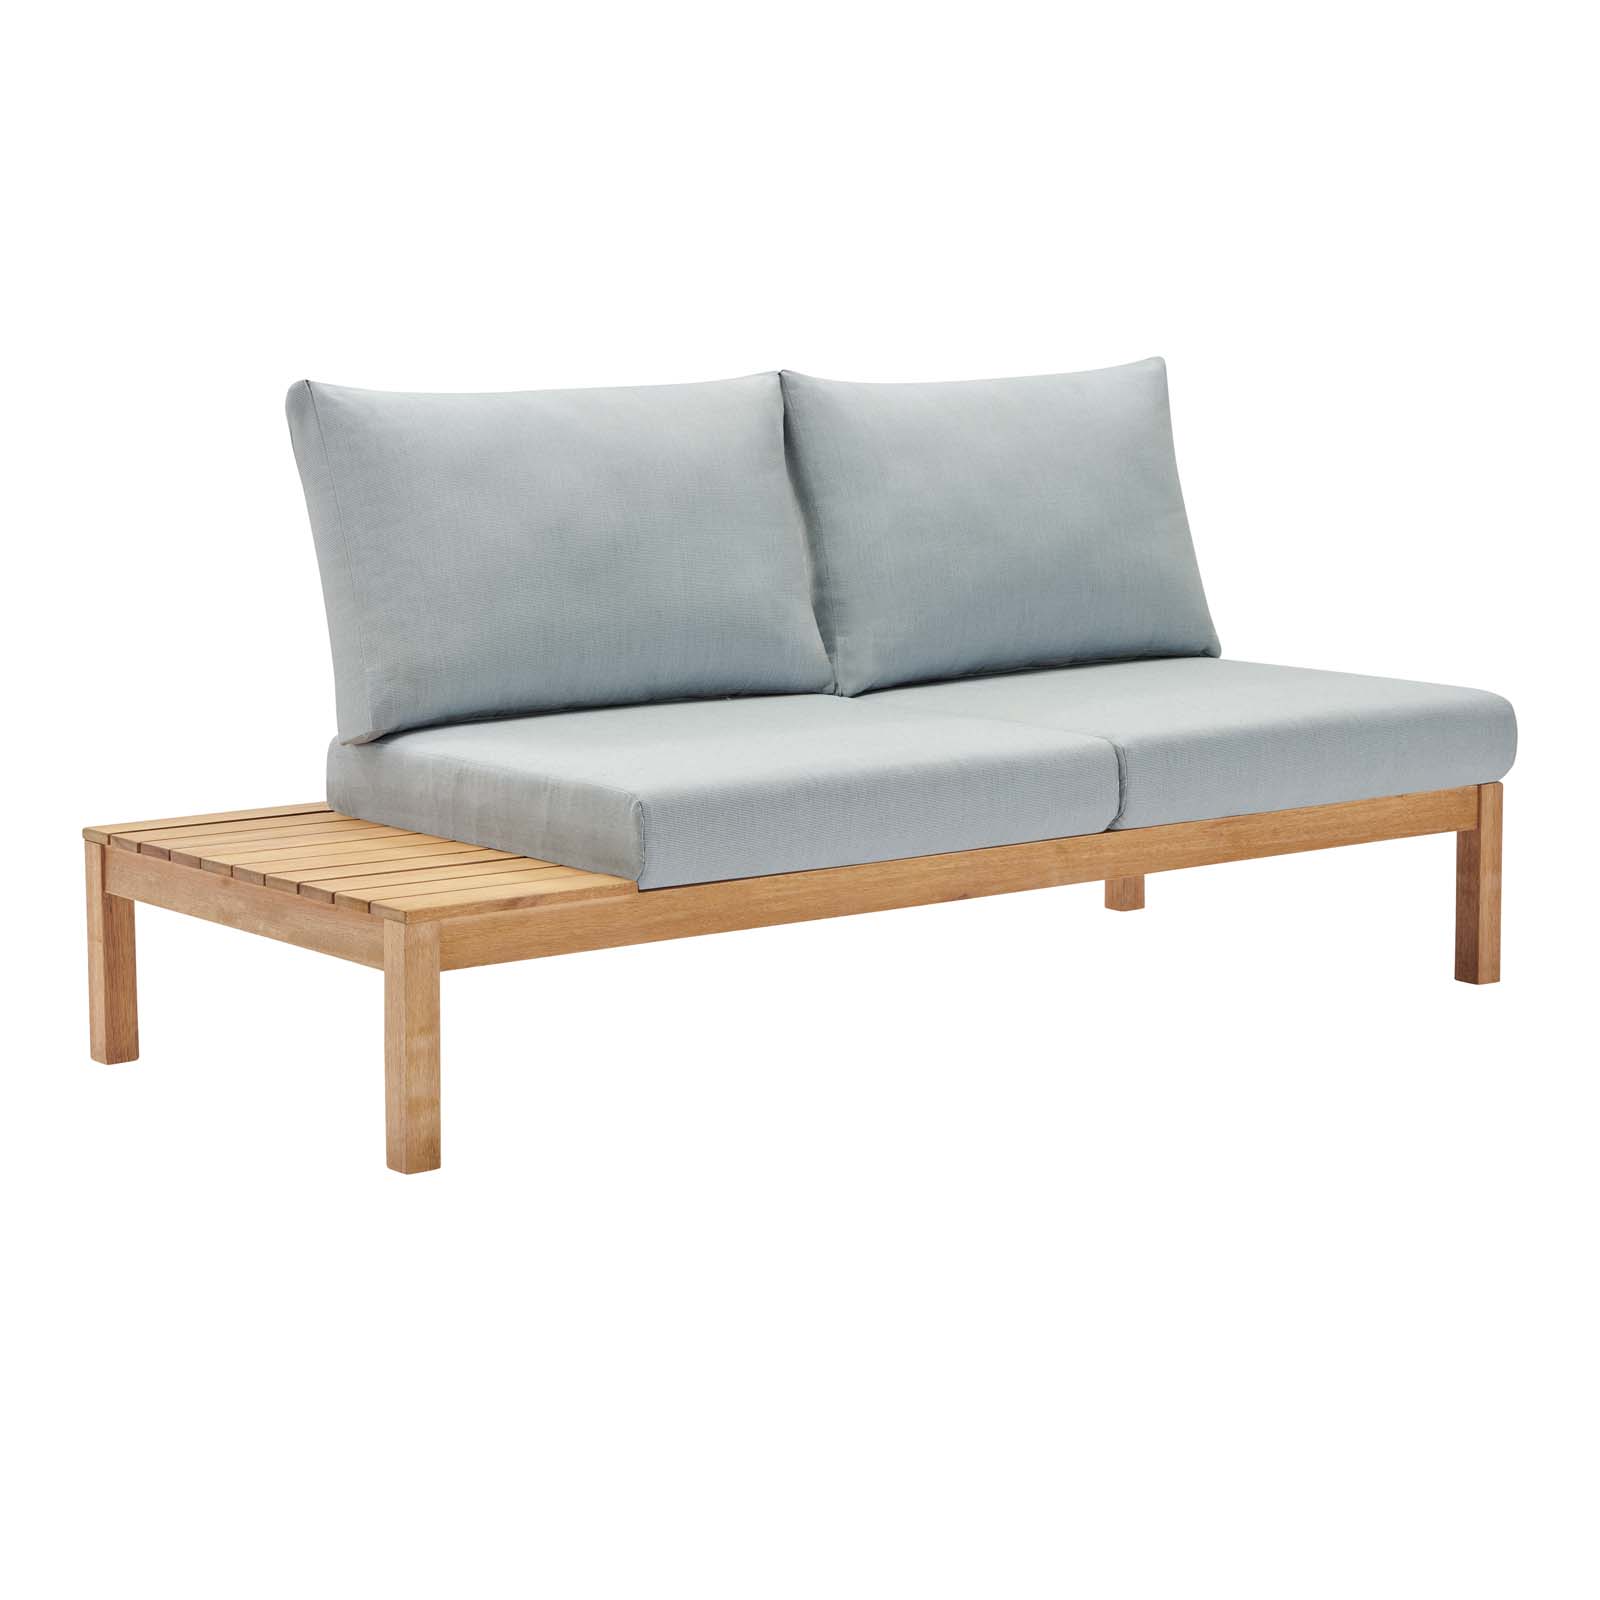 Modway Freeport Karri Wood Outdoor Patio Loveseat with Left-Facing Side End Table in Natural Light Blue - image 3 of 5